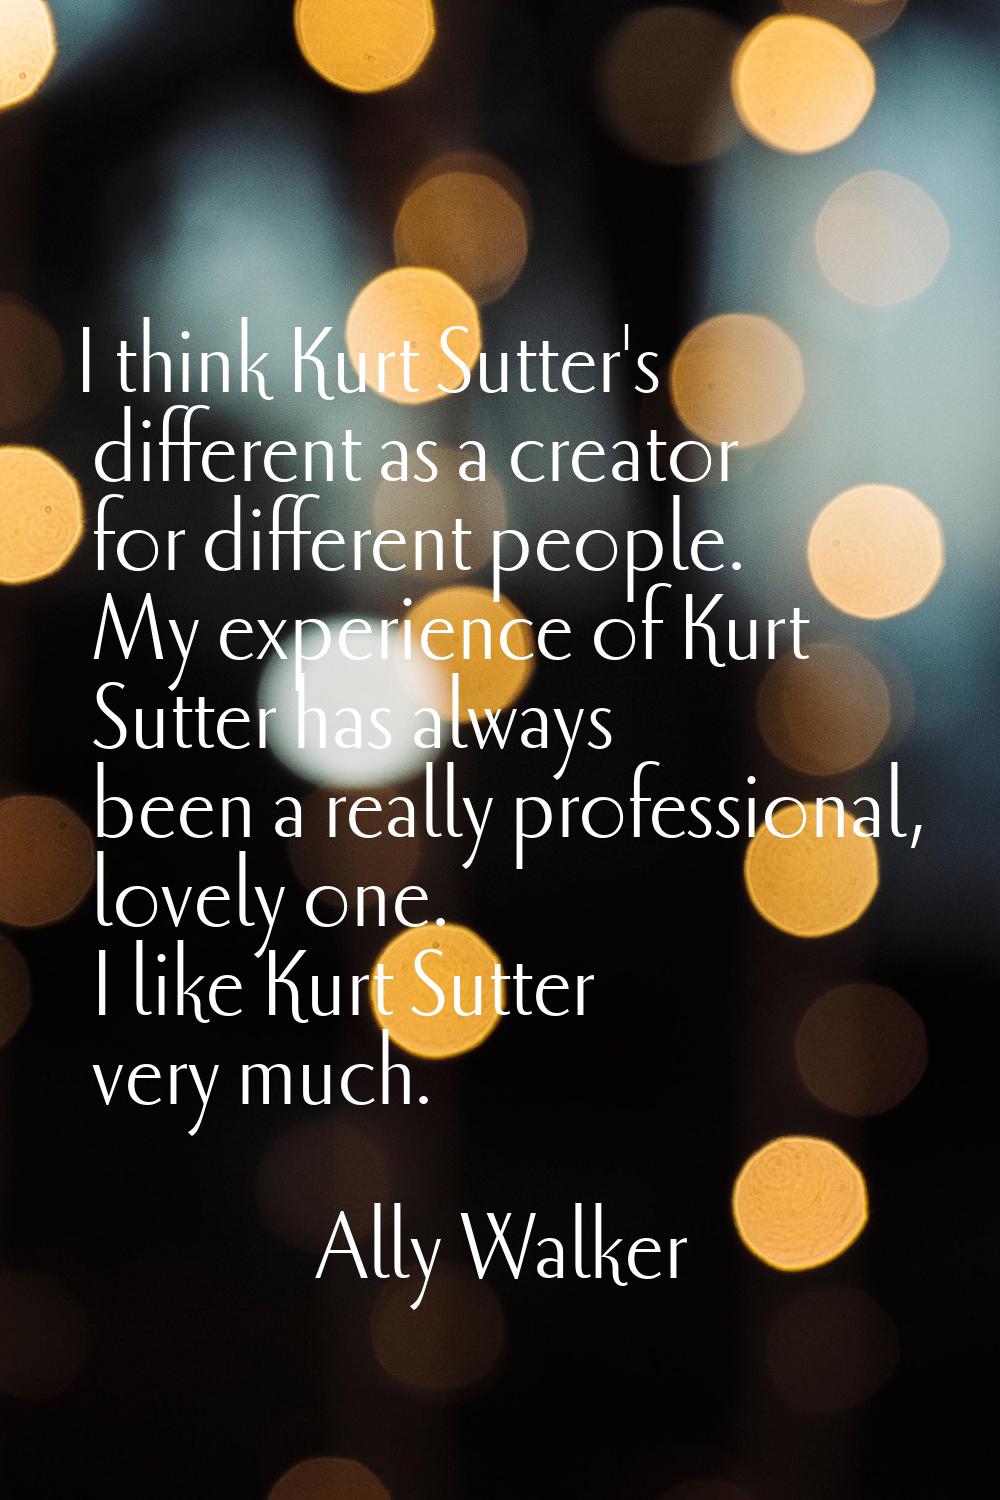 I think Kurt Sutter's different as a creator for different people. My experience of Kurt Sutter has